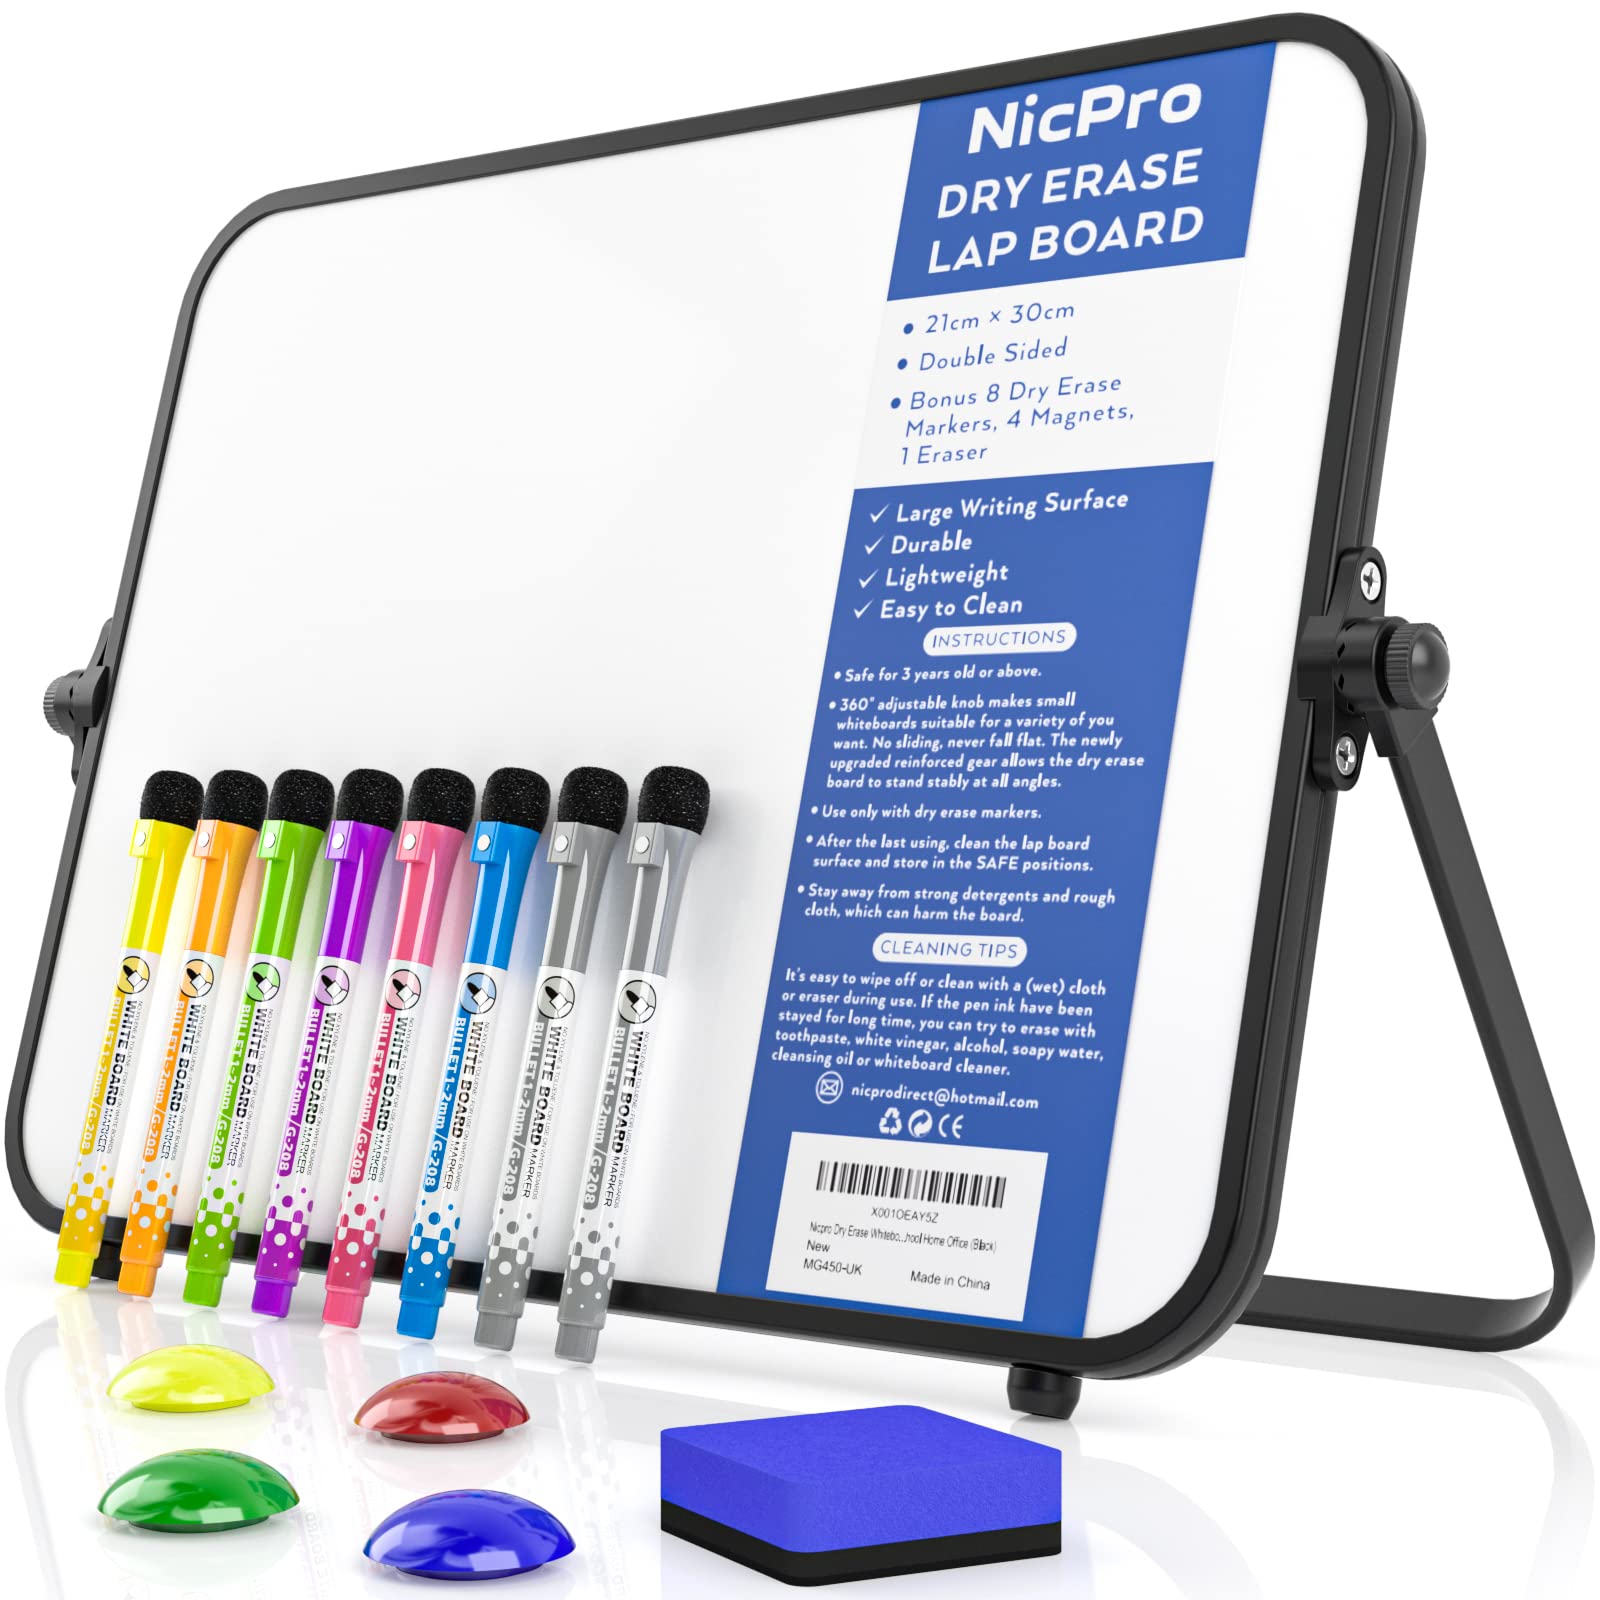 Nicpro Self Adhesive Chalkboard Contact Paper Black 17.7 X 78.7 Chal